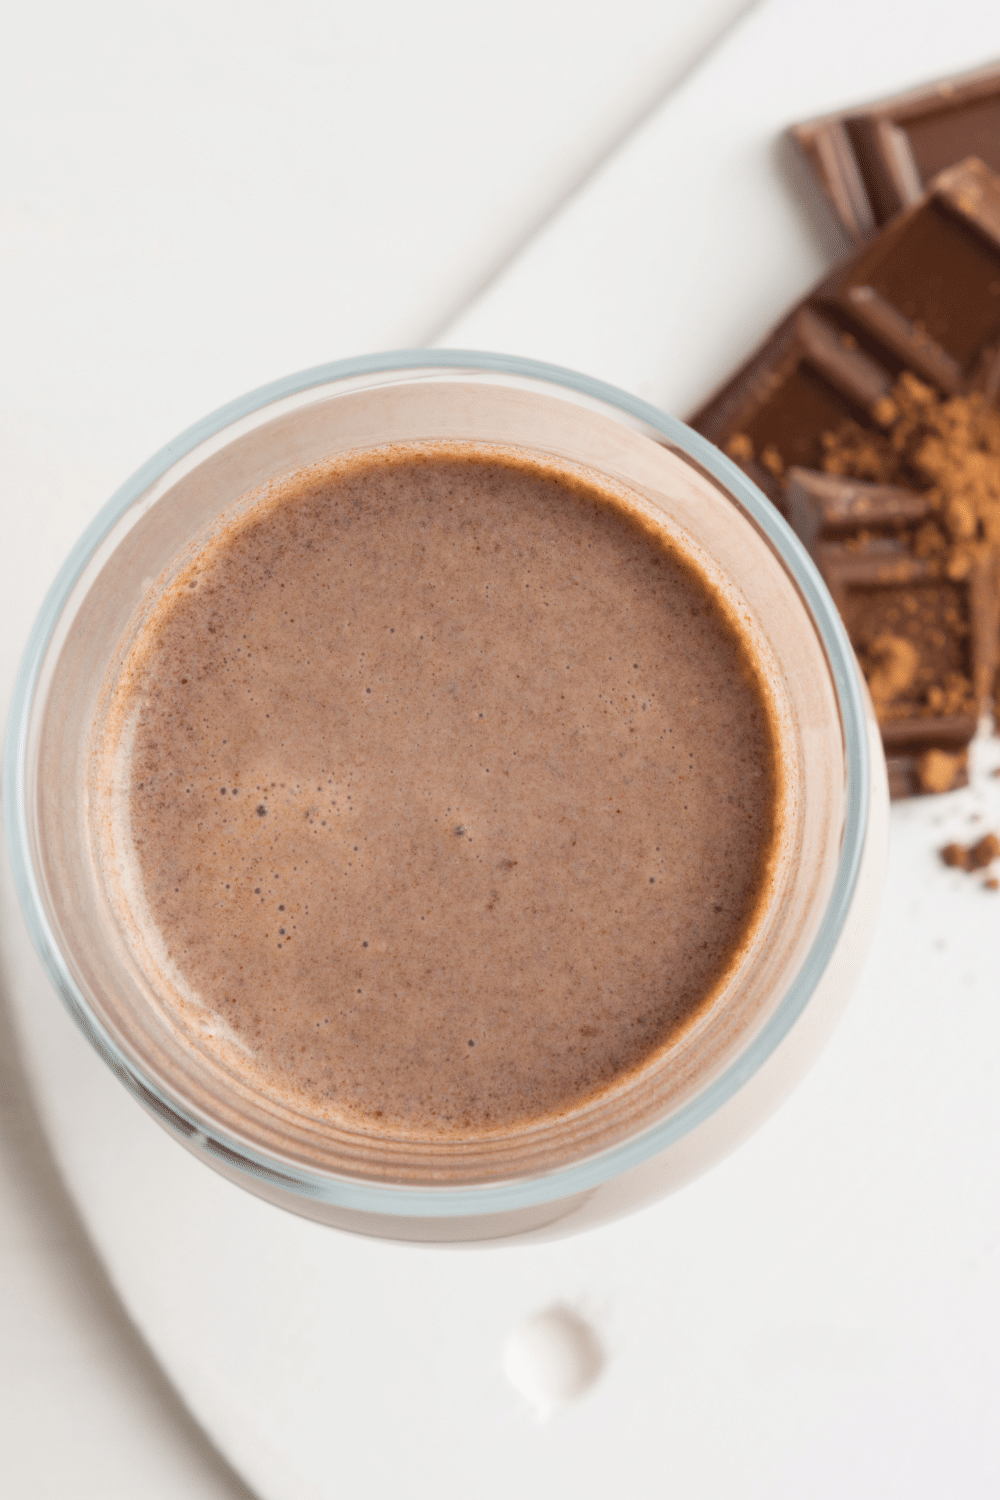 A deep chocolate-colored smoothie in a glass, topped with shaved chocolate and a slice of avocado.